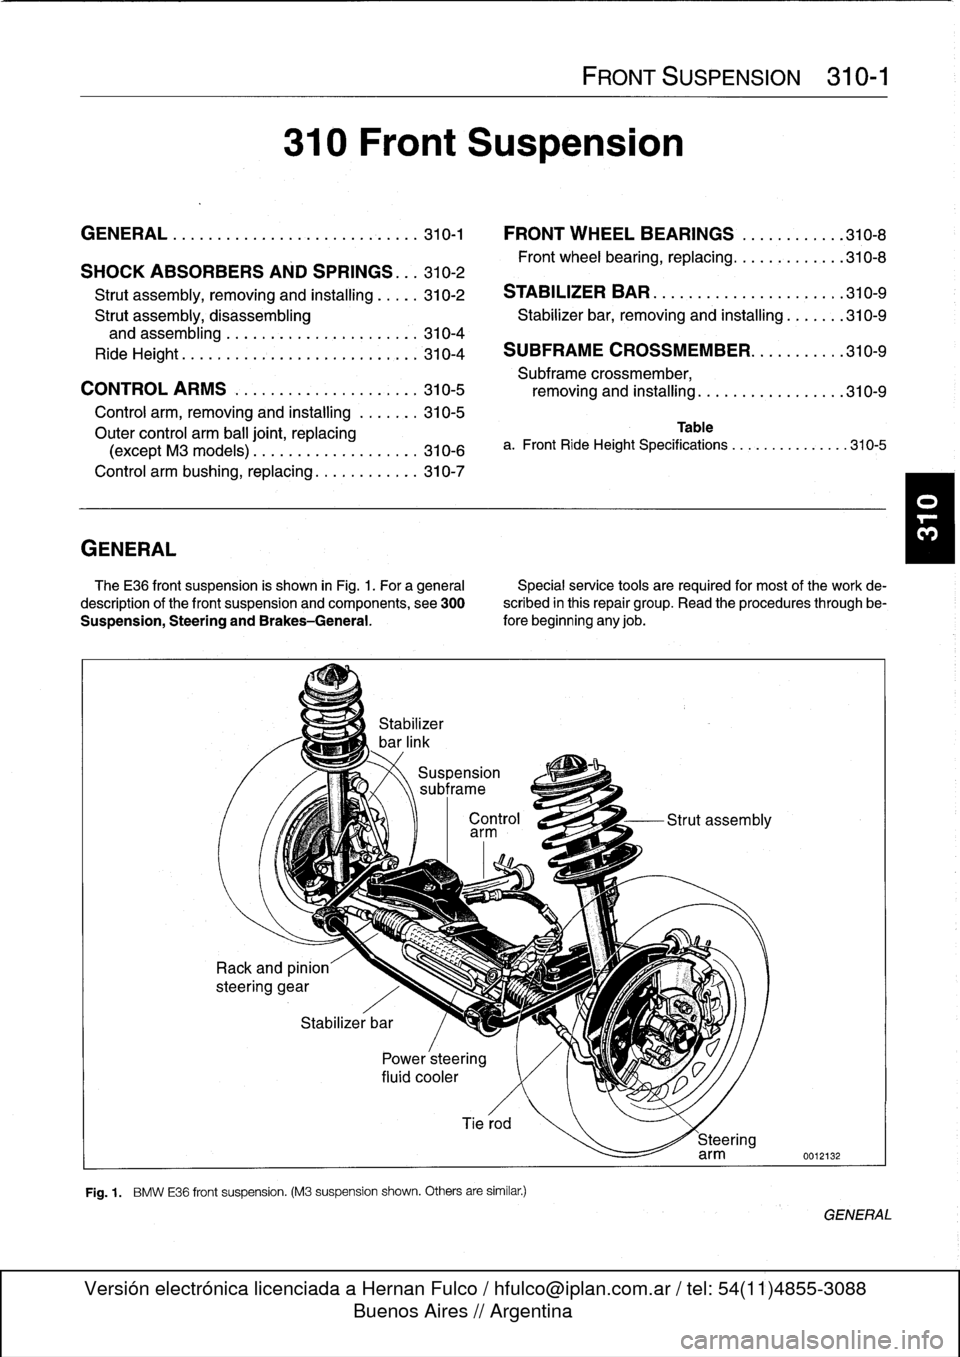 BMW 323i 1993 E36 User Guide 
GENERAL

310
Front
Suspension

GENERAL
..
.
.
.
.
.
.
.
.
.
.......
.
........
.
310-1

	

FRONT
WHEEL
BEARINGS
..
.
.
.
.......
310-8

SHOCK
ABSORBERS
AND
SPRINGS
..
.
310-2

	

Front
wheel
bearing,